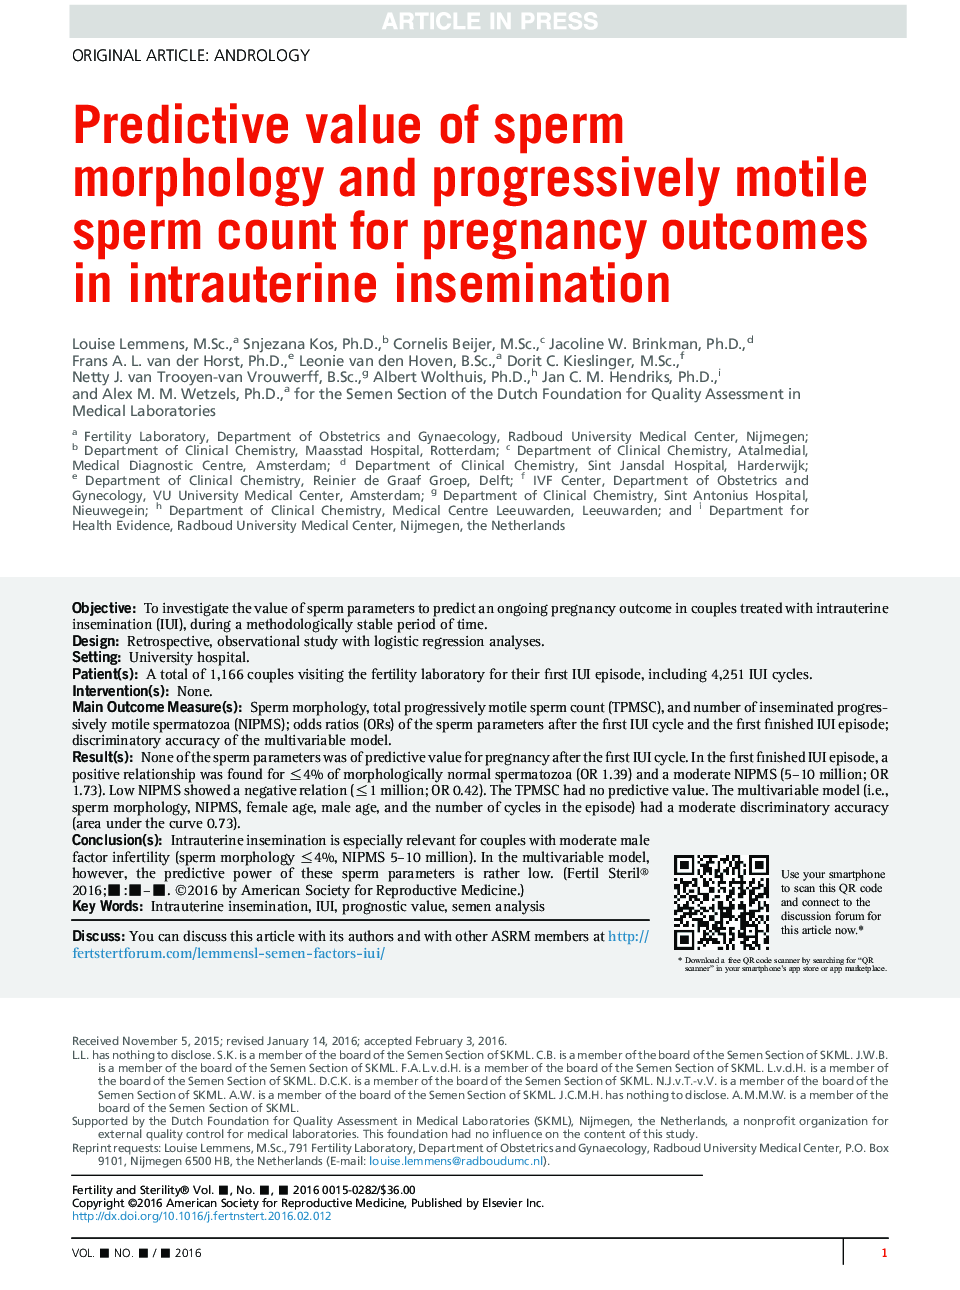 Predictive value of sperm morphology and progressively motile sperm count for pregnancy outcomes in intrauterine insemination